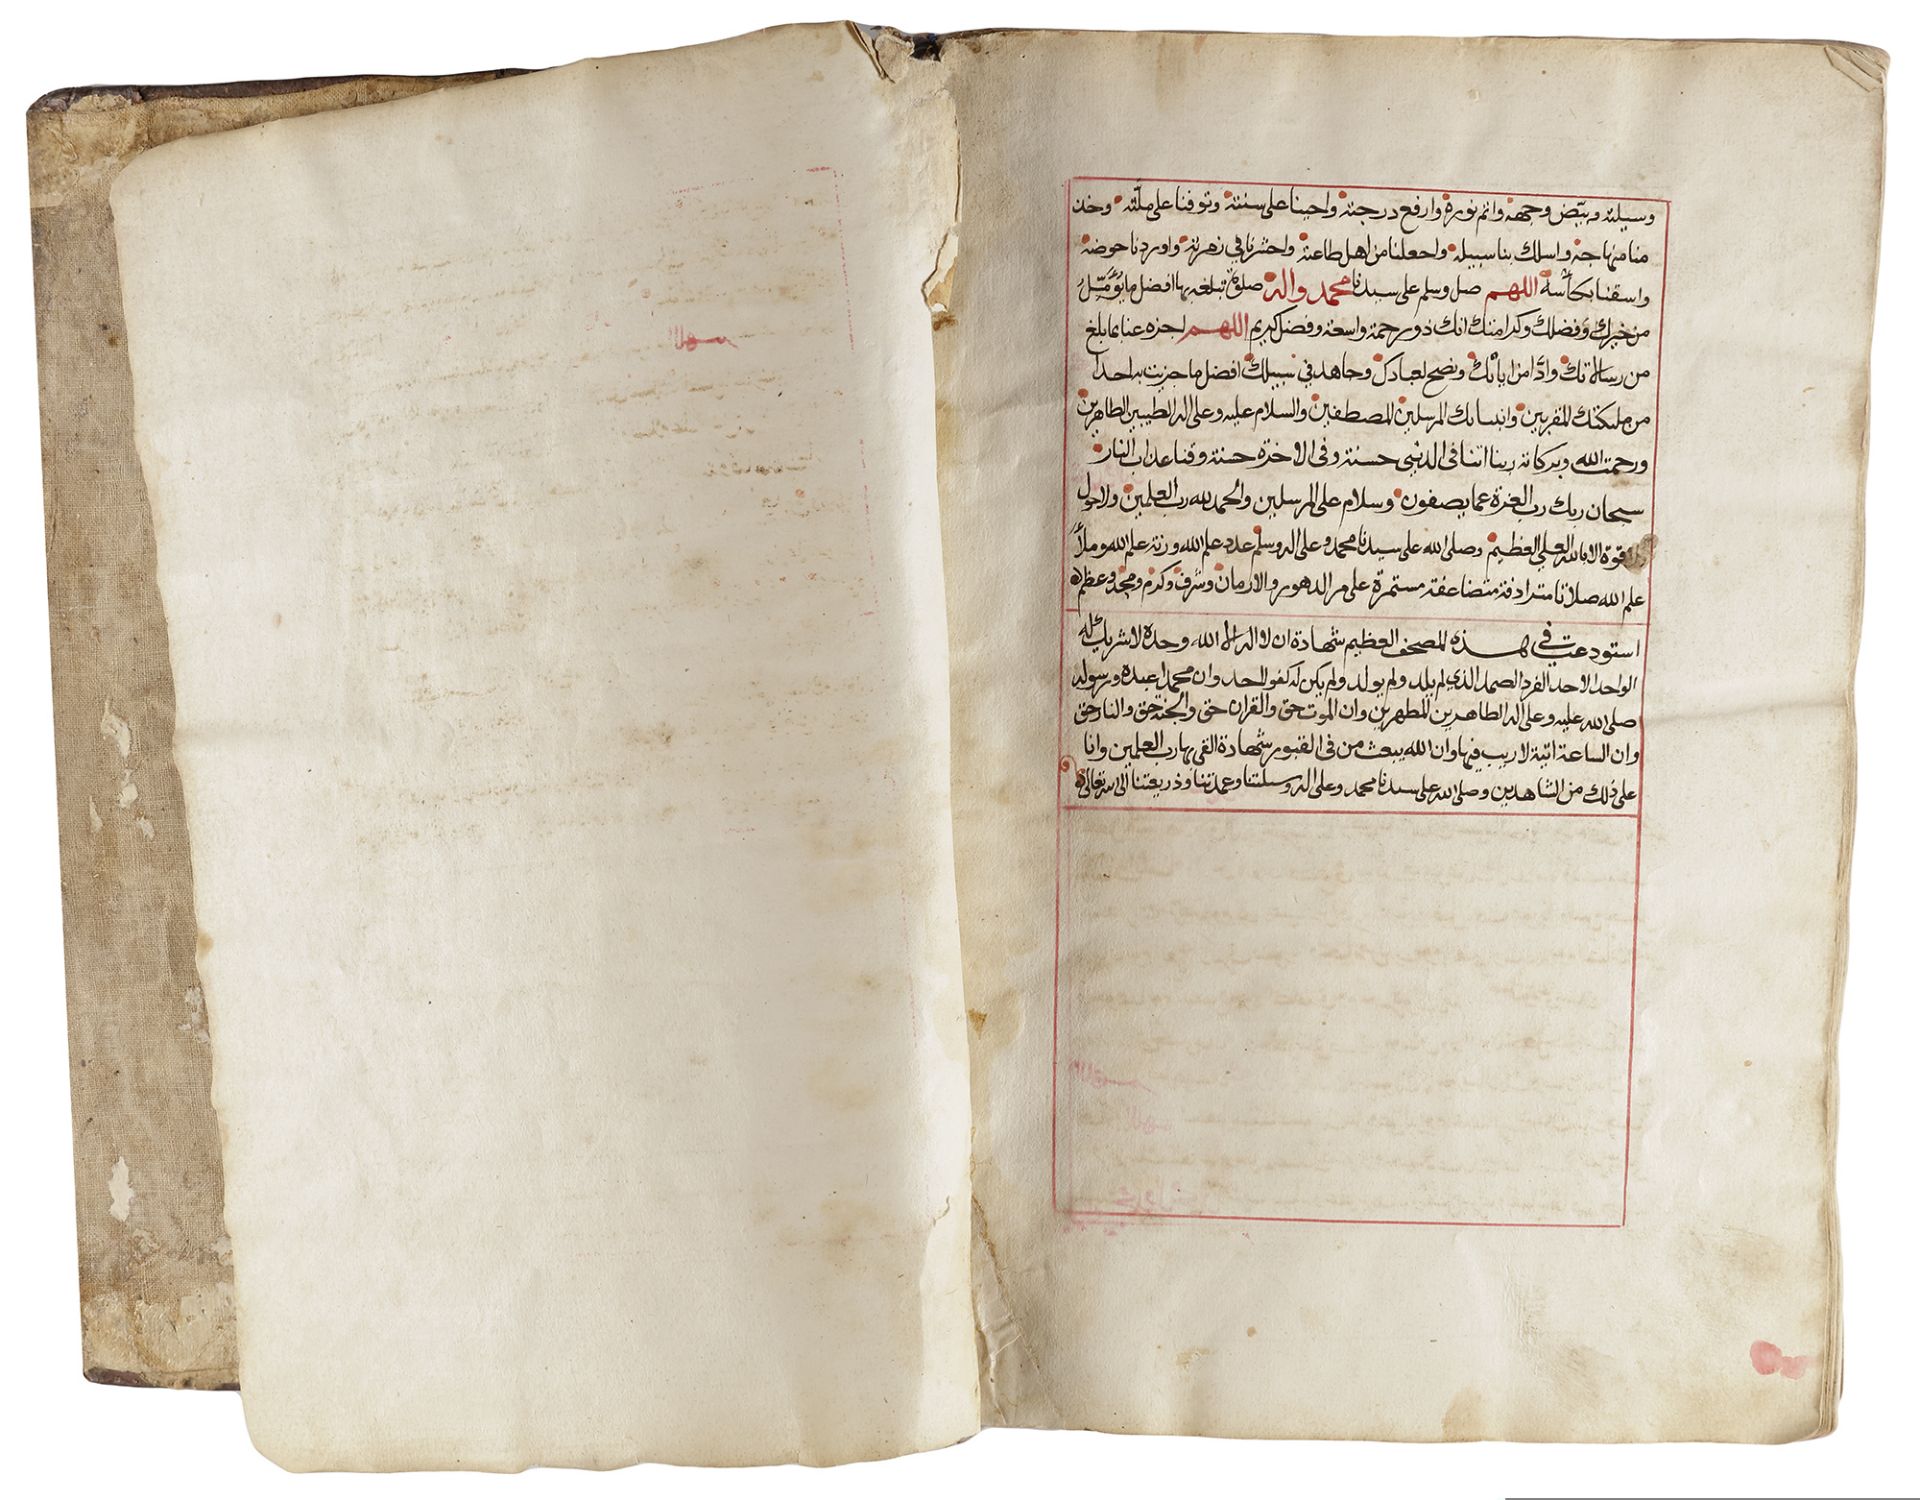 AN ILLUMINATED QURAN, YEMEN, BY AHMED QASEM IBN ISMAIL IN 1035 AH/1626 AD - Image 14 of 18